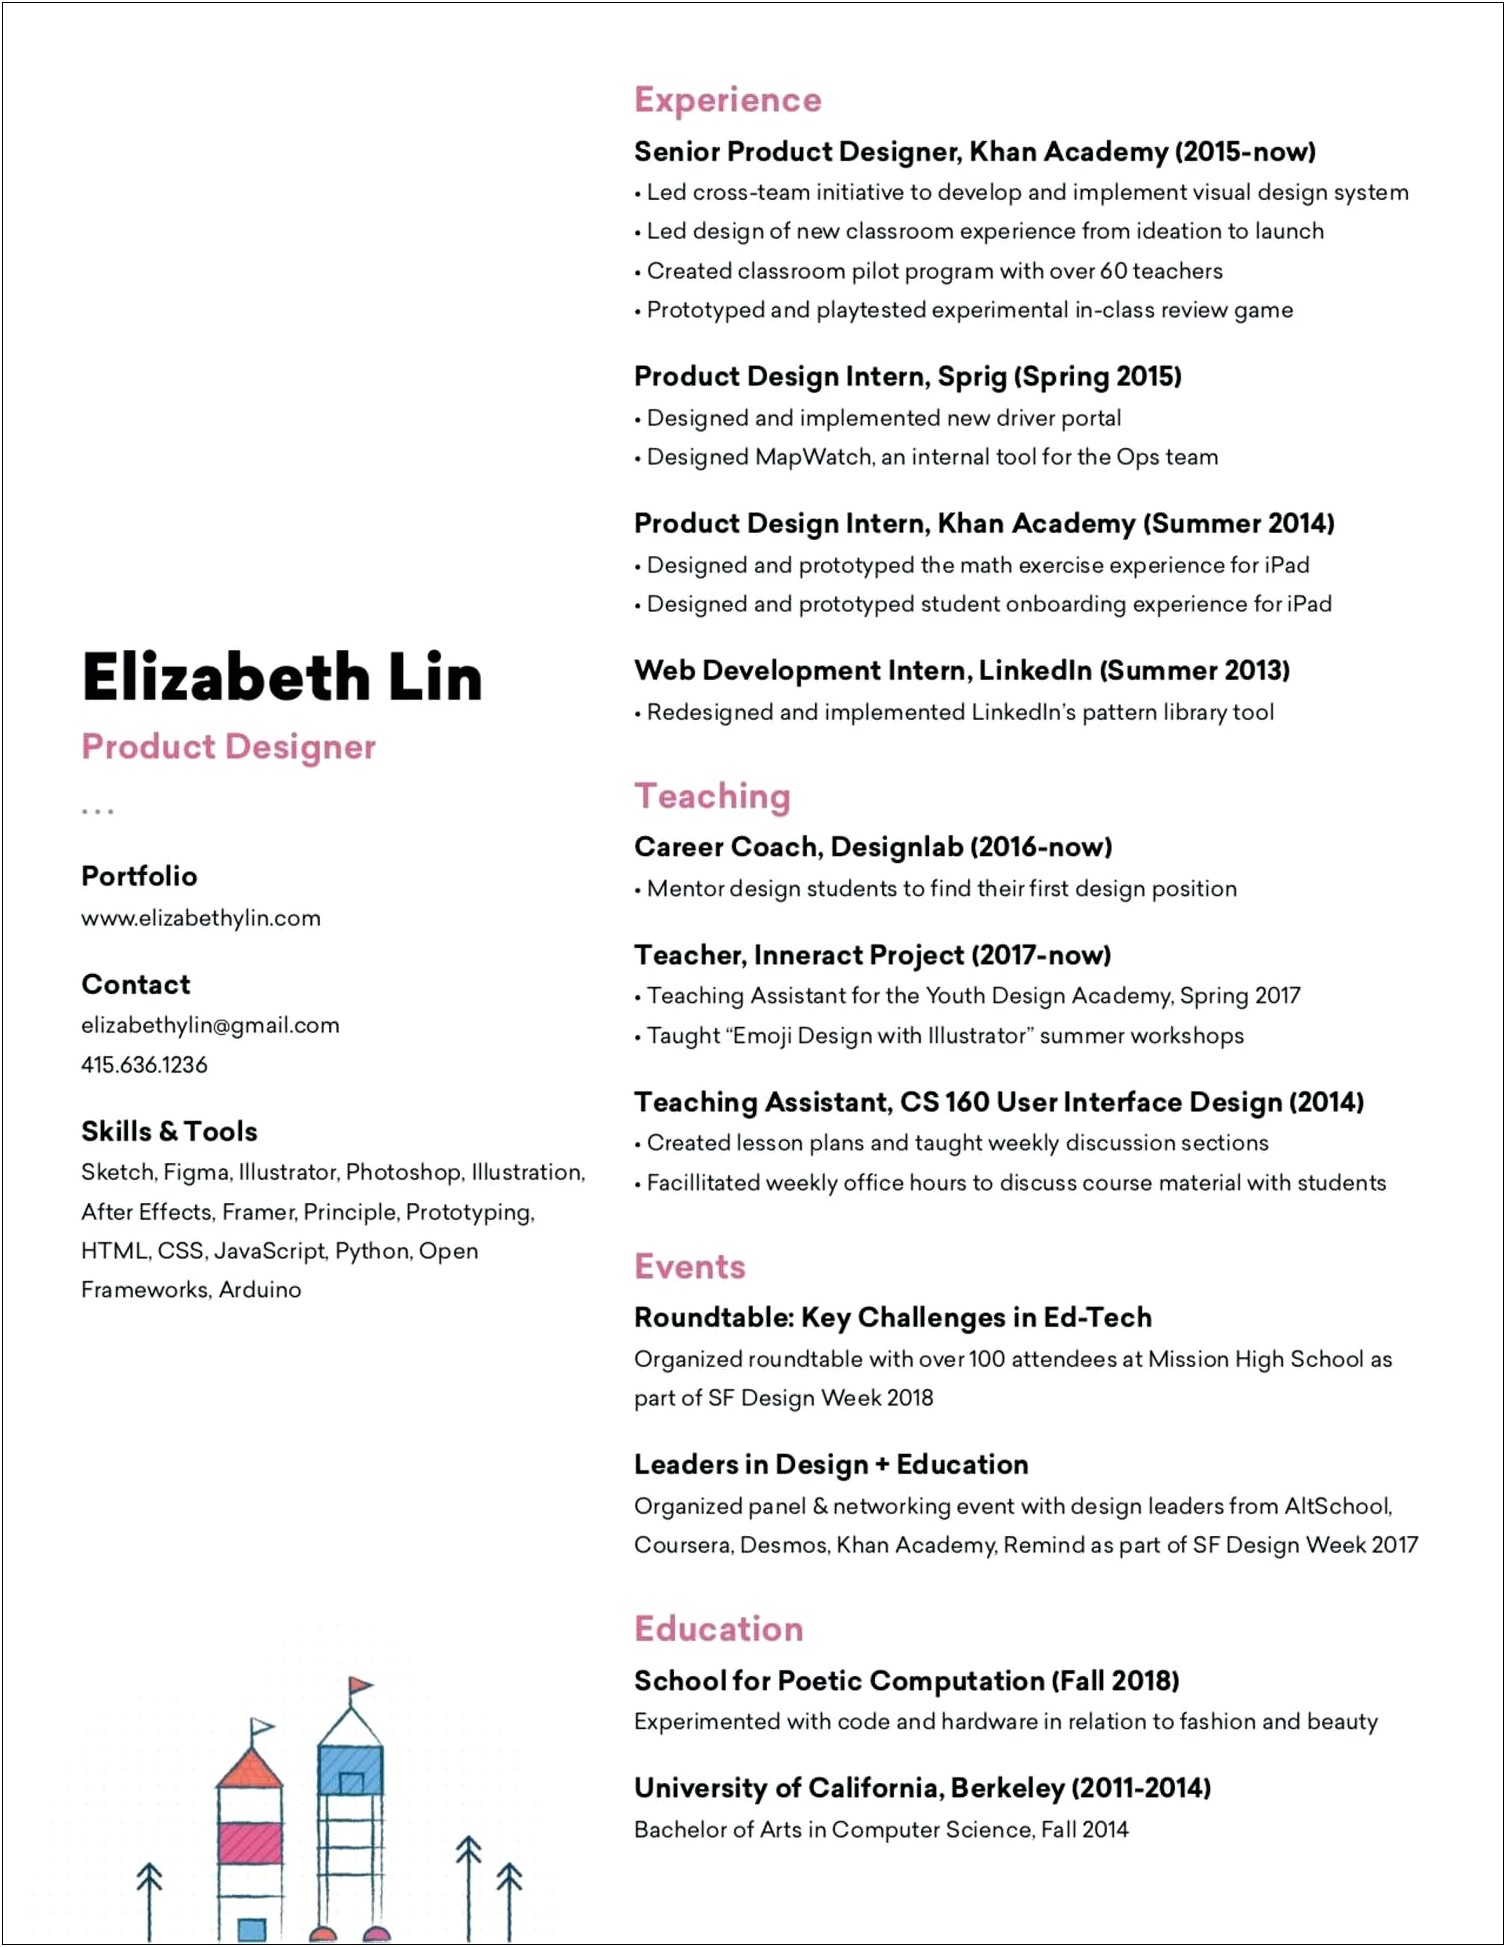 Example Of Resume For Product Designer